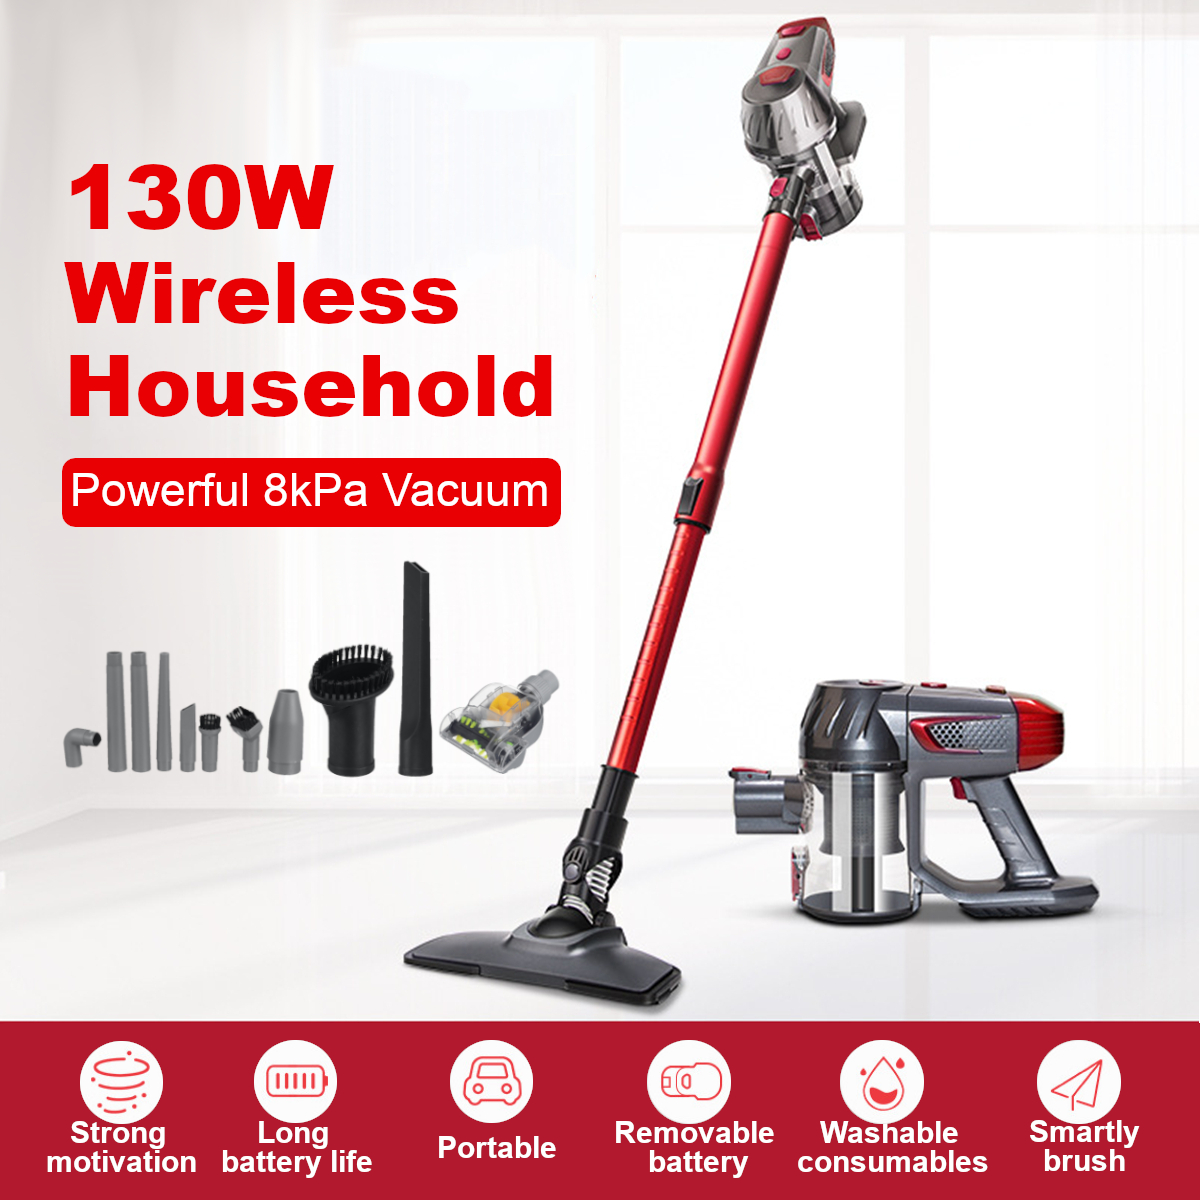 ZEK Cordless Stick Handheld Vacuum Cleaner 8000Pa Powerful Suction 130W Washable Filter for Home Hard Floor Carpet Car Pet